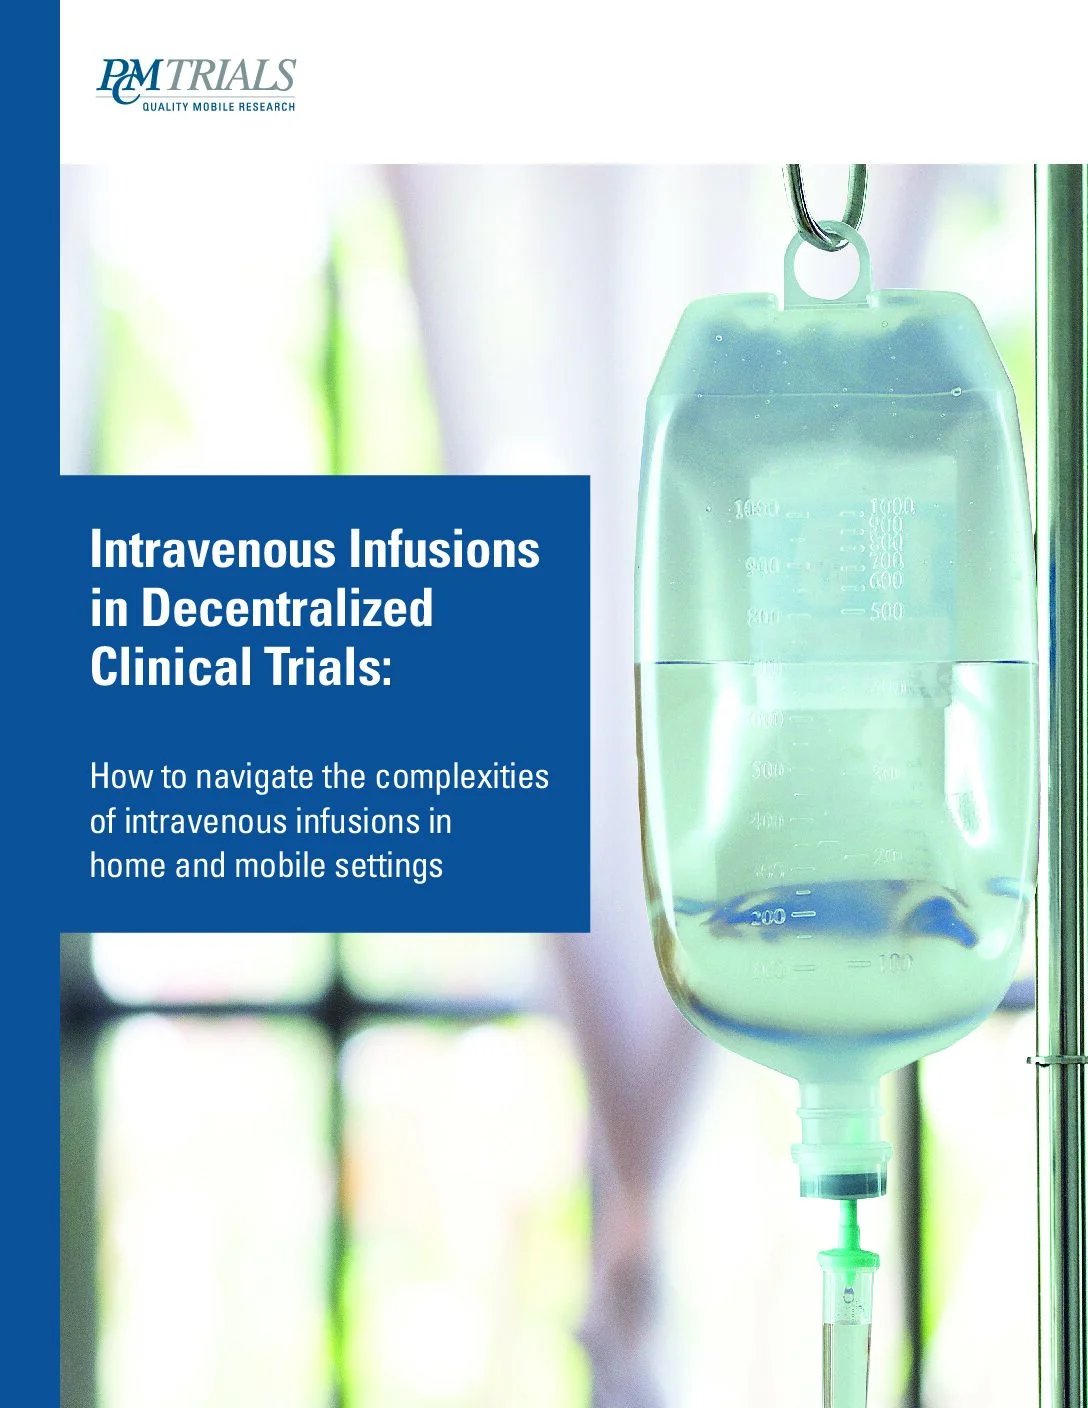 PCM_Intravenous-Infusions-in-Decentralized-Clinical-Trials-pdf